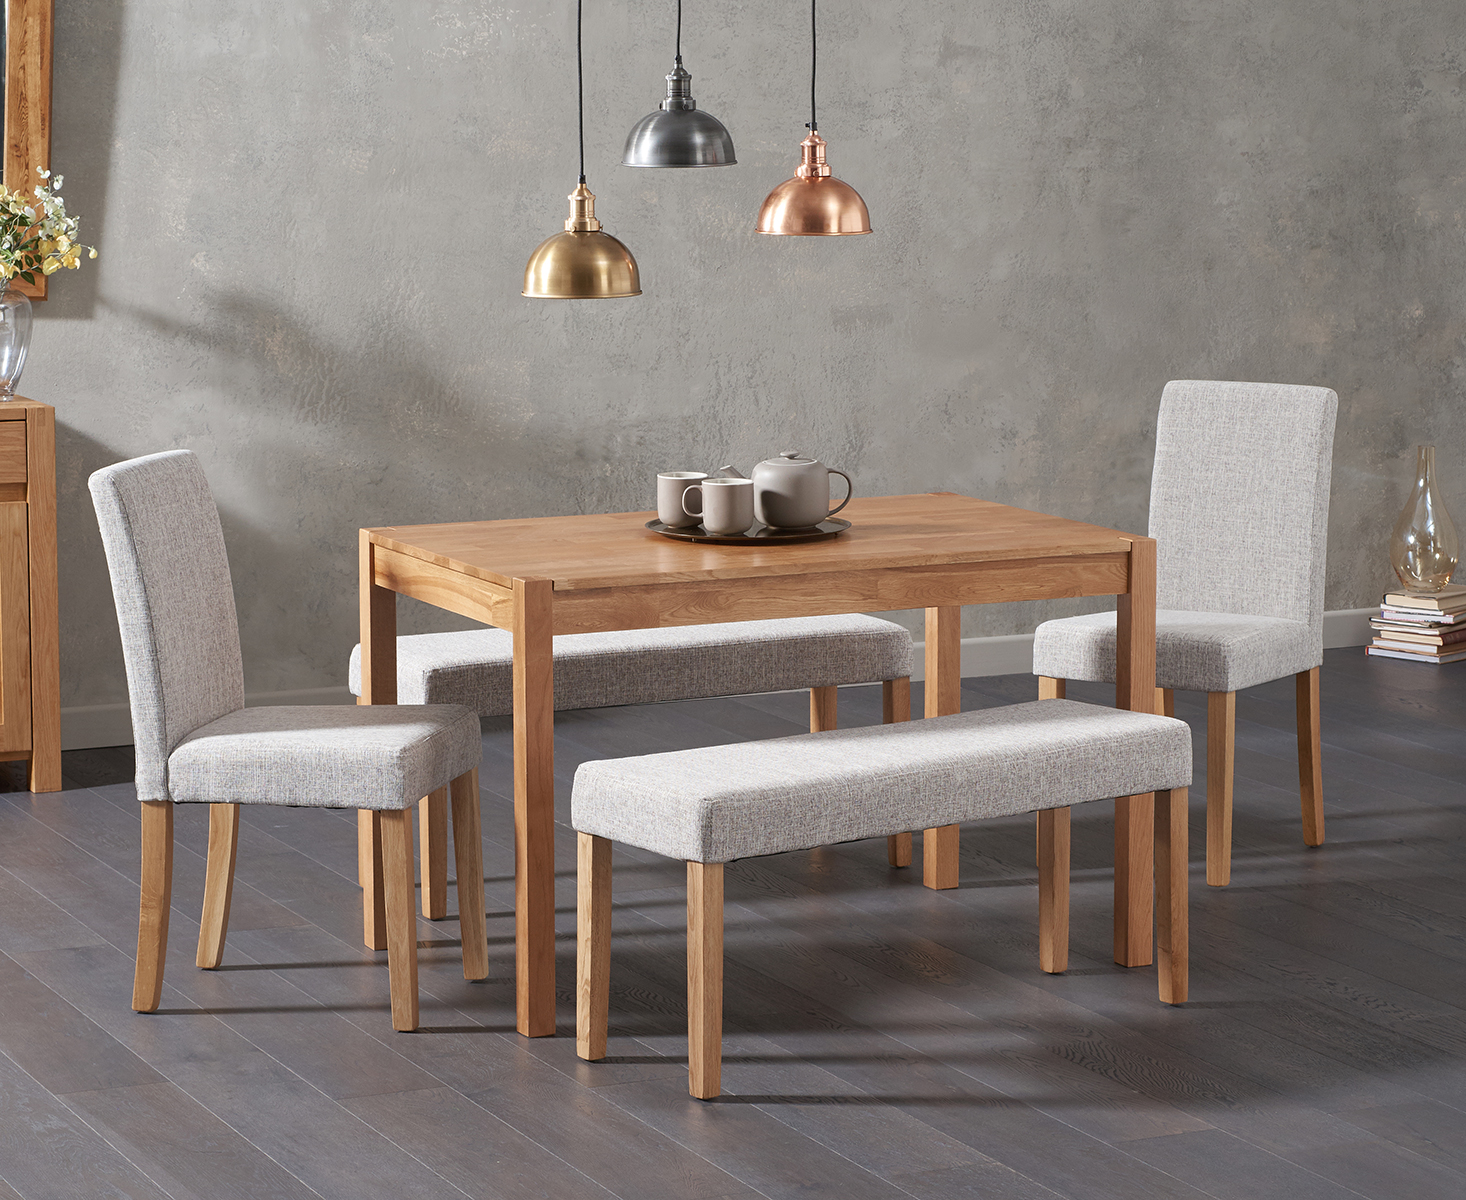 Oxford 120cm Solid Oak Dining Table With Lila Grey Benches And Lila Chairs